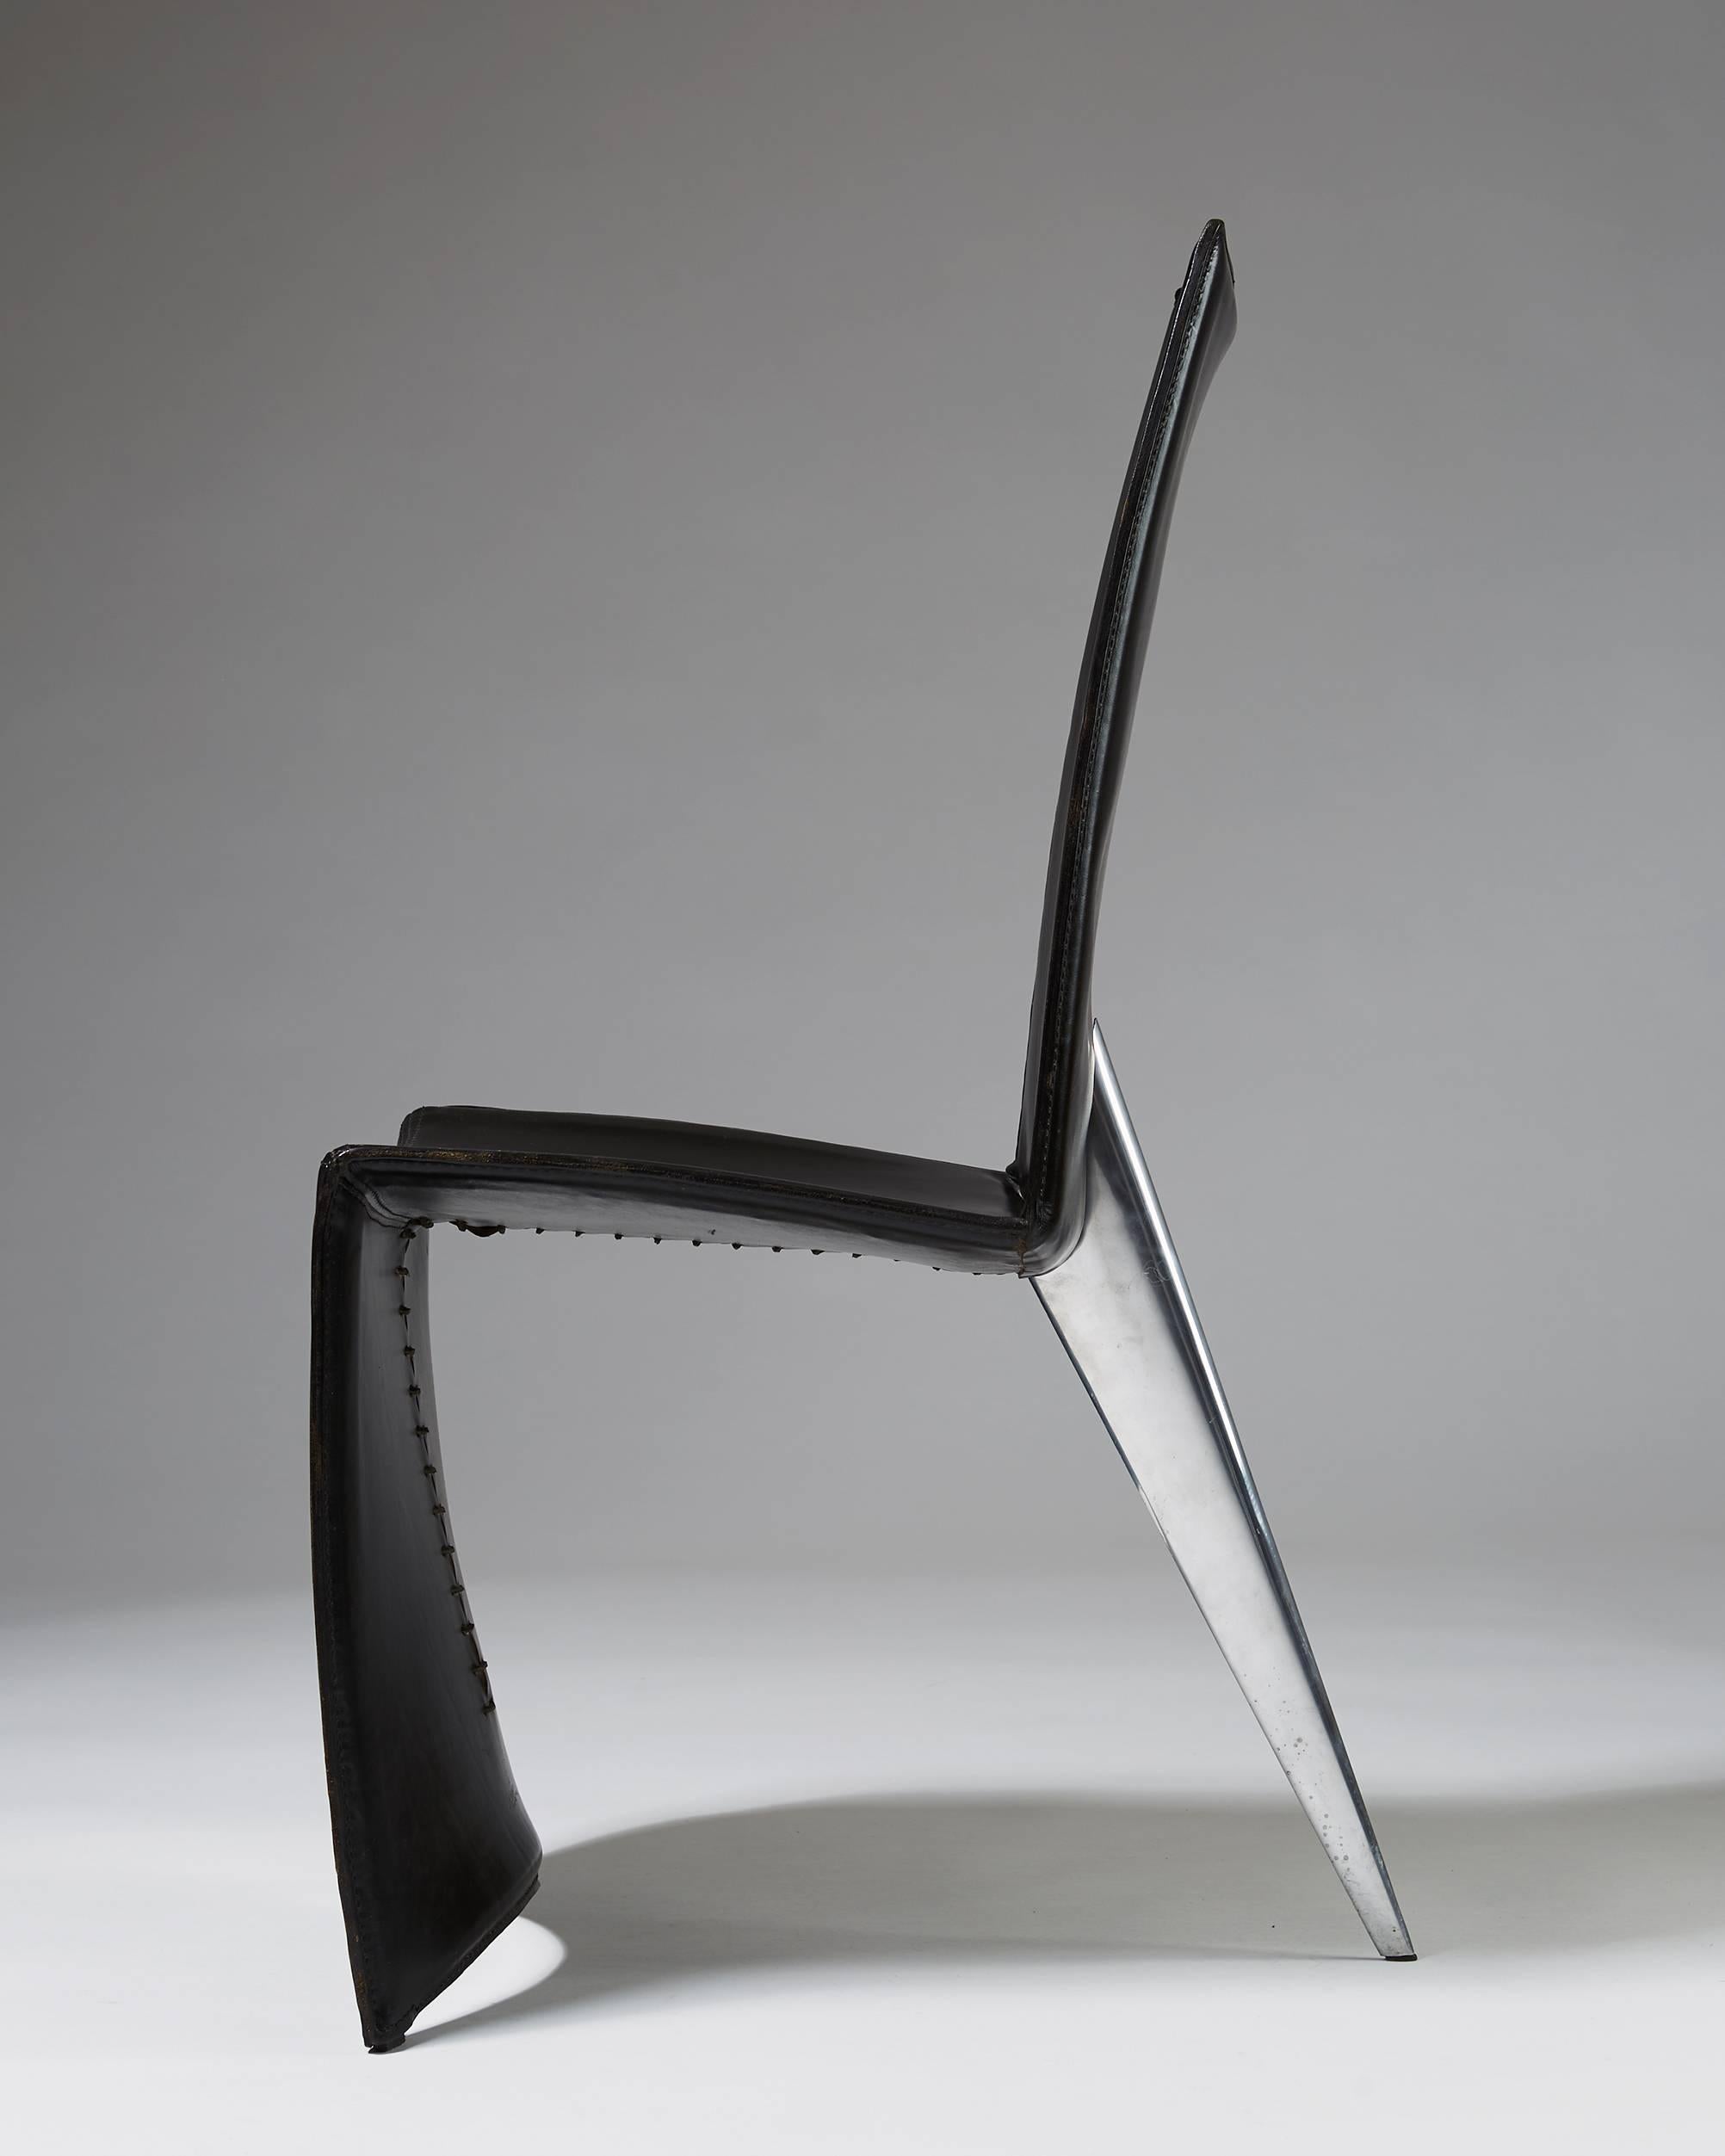 Cast Set of Six Chairs ‘J Serie Lang’ Designed by Philippe Starck for Aleph, Italy